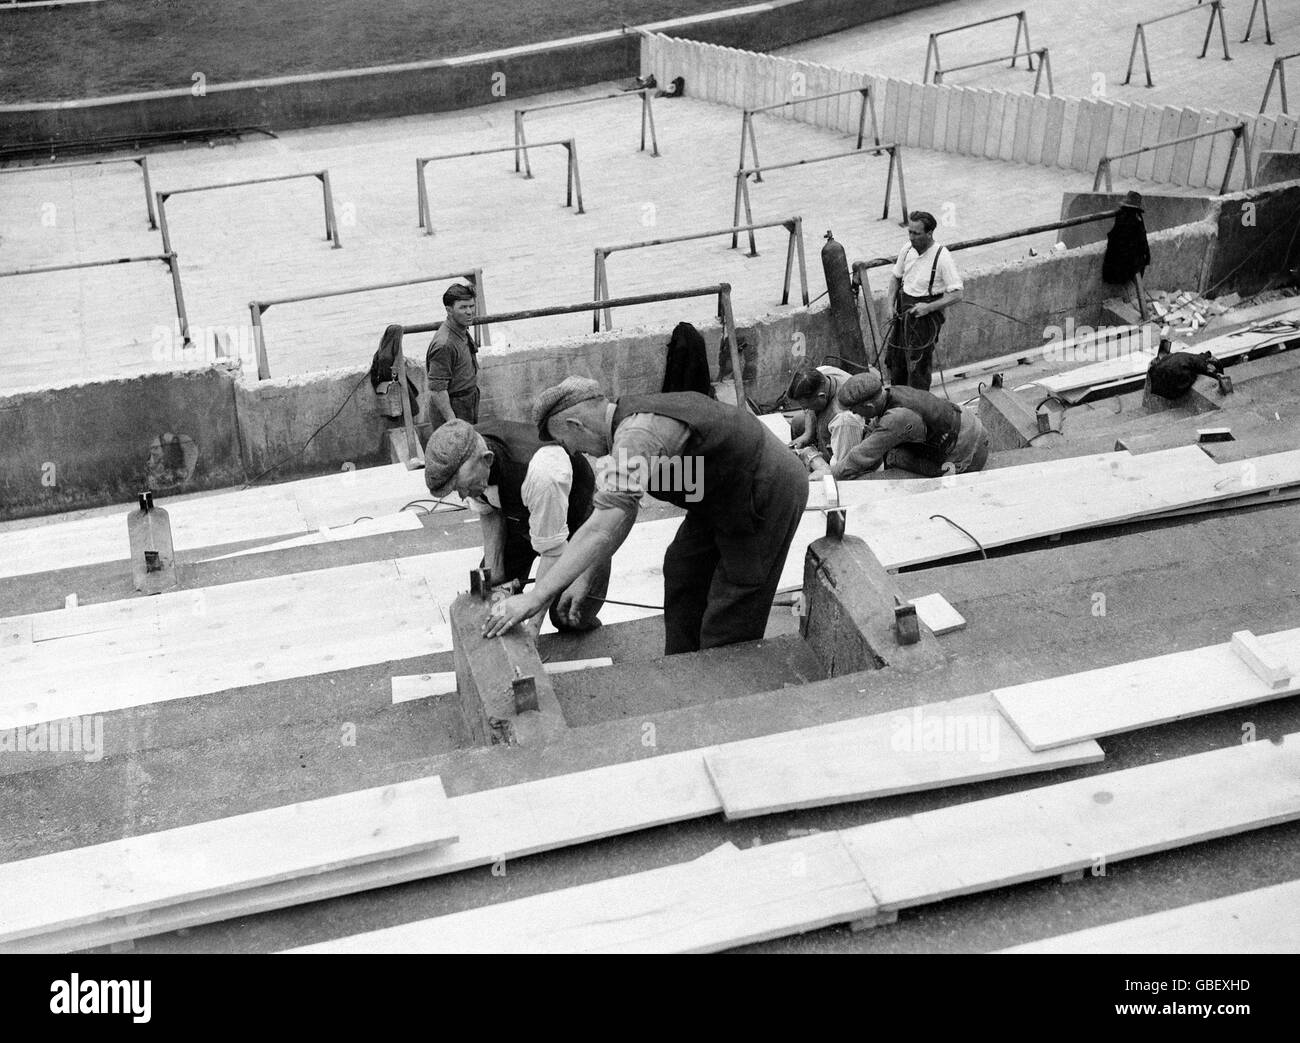 Olympic Games - London 1948 - Preparations Stock Photo